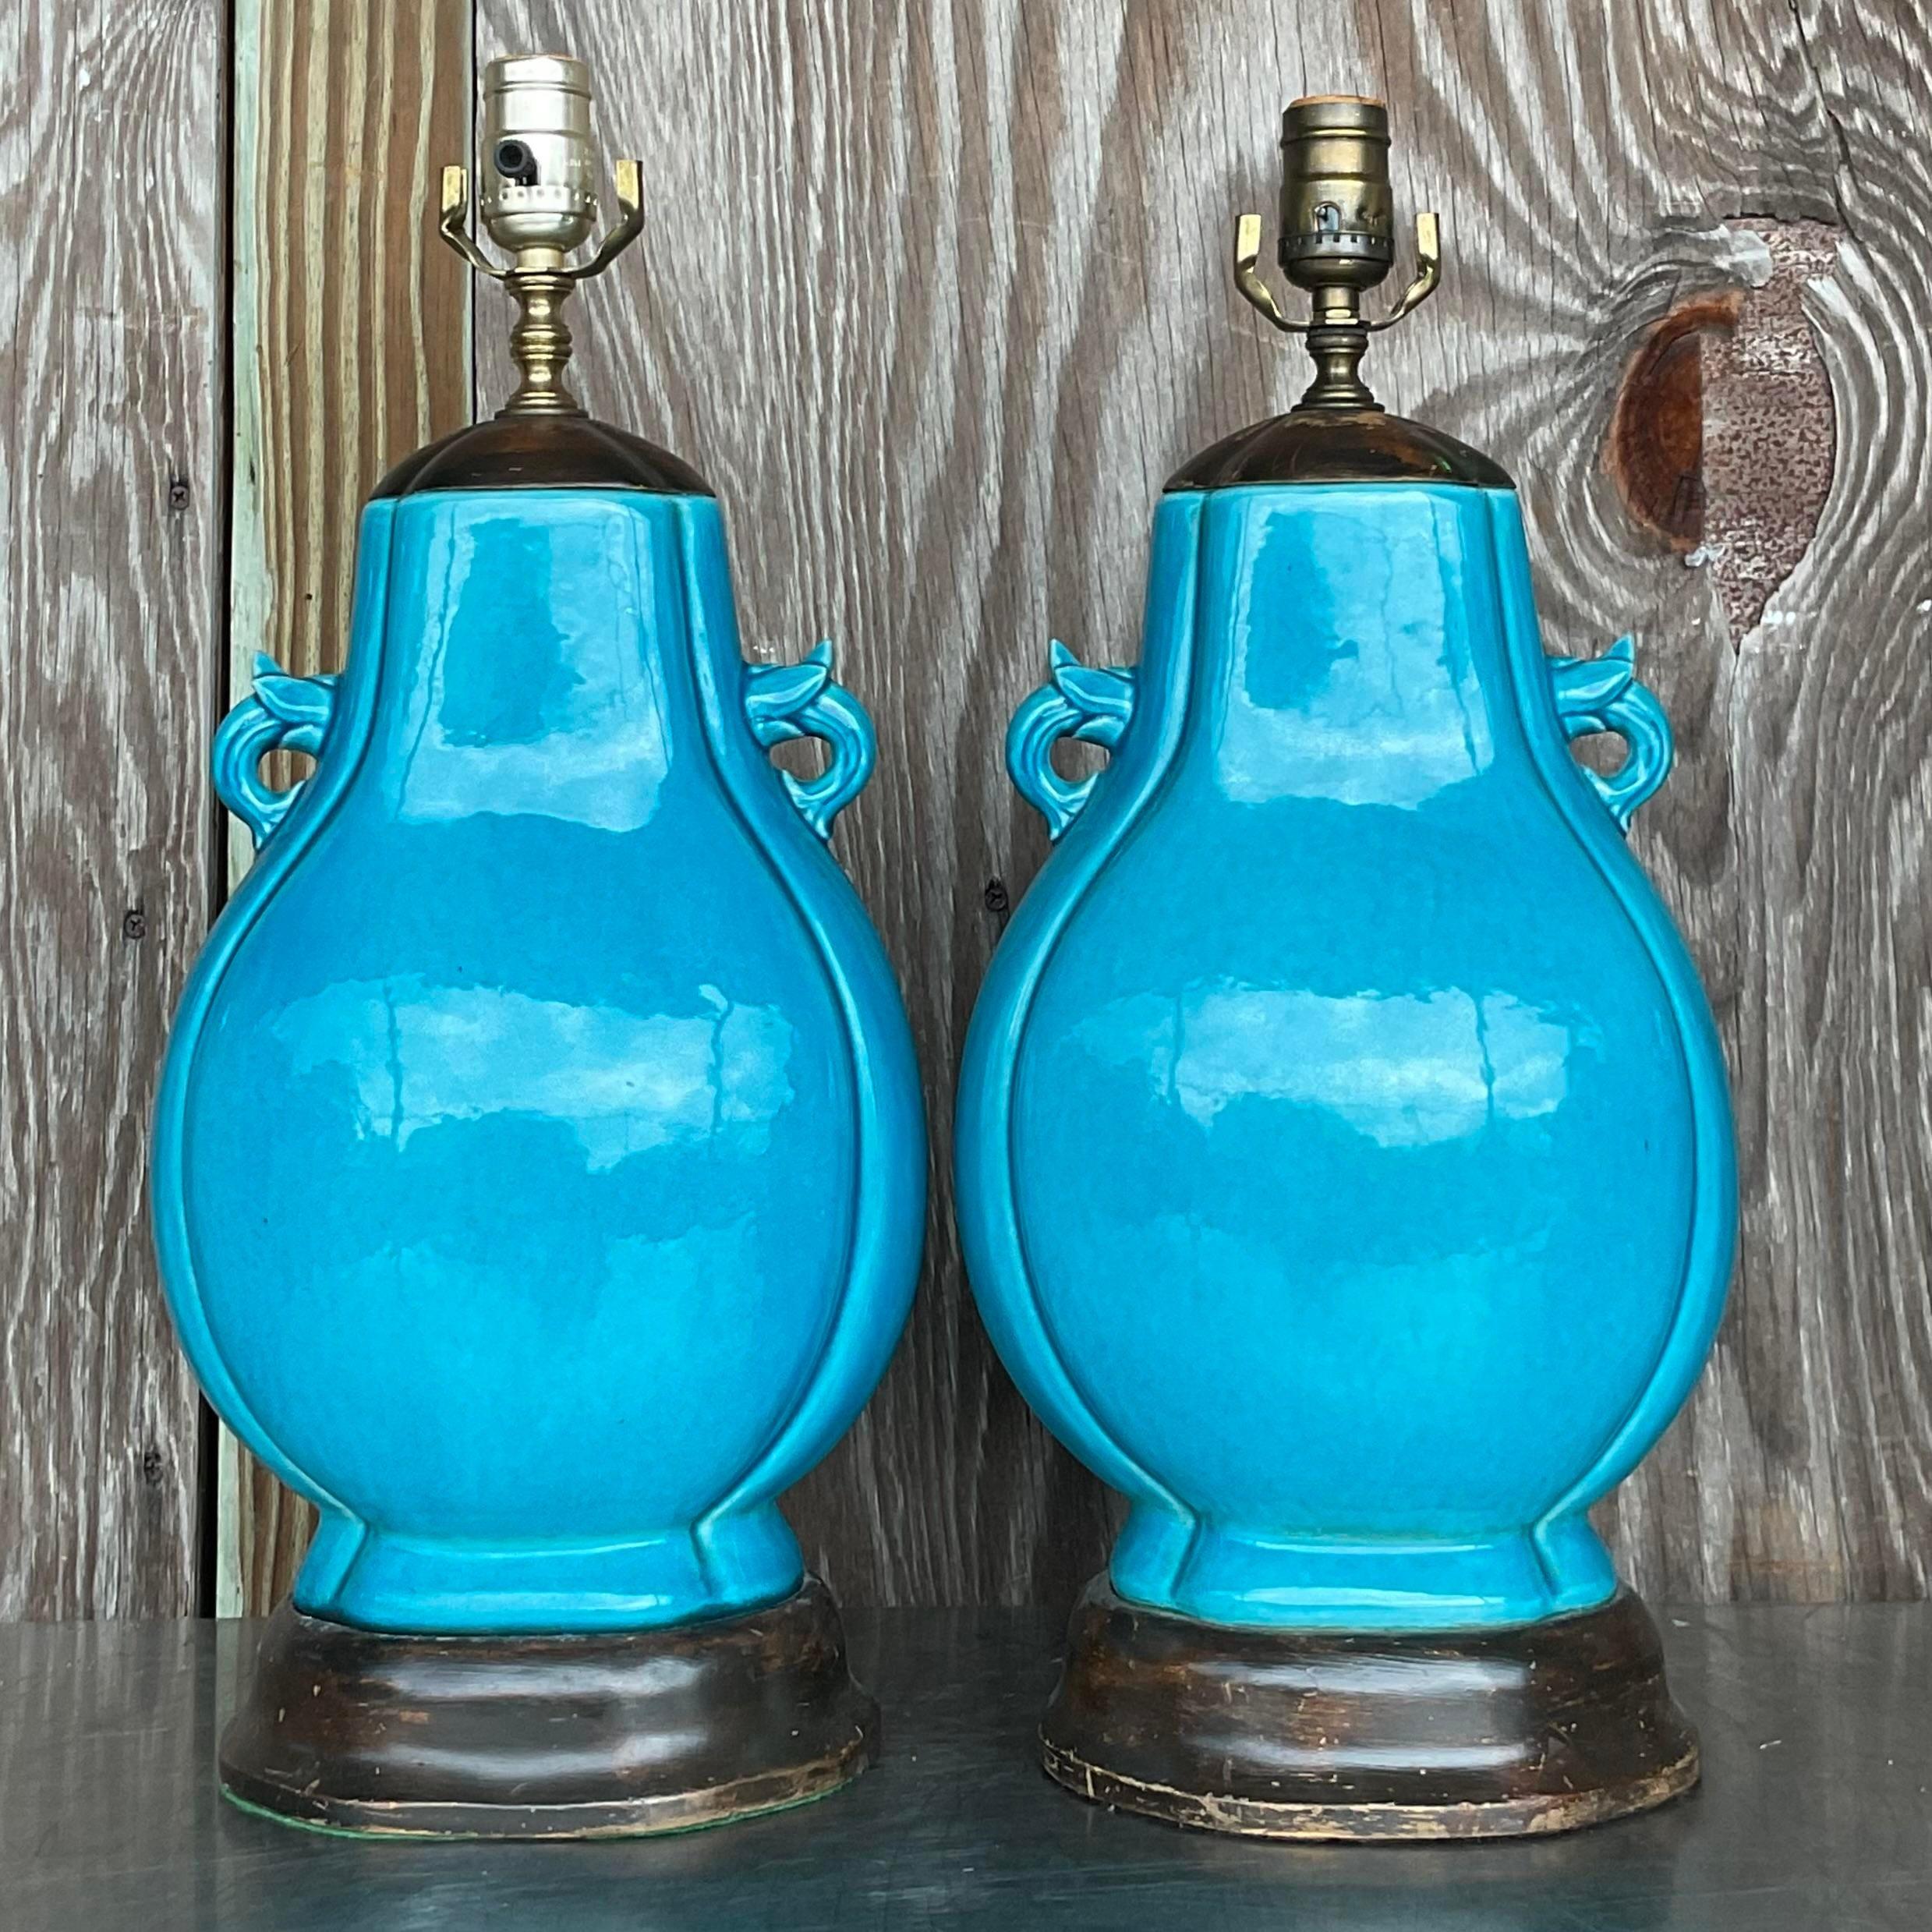 Metal Vintage Boho Turquoise Glazed Ceramic Moonflask Table Lamps - a Pair For Sale